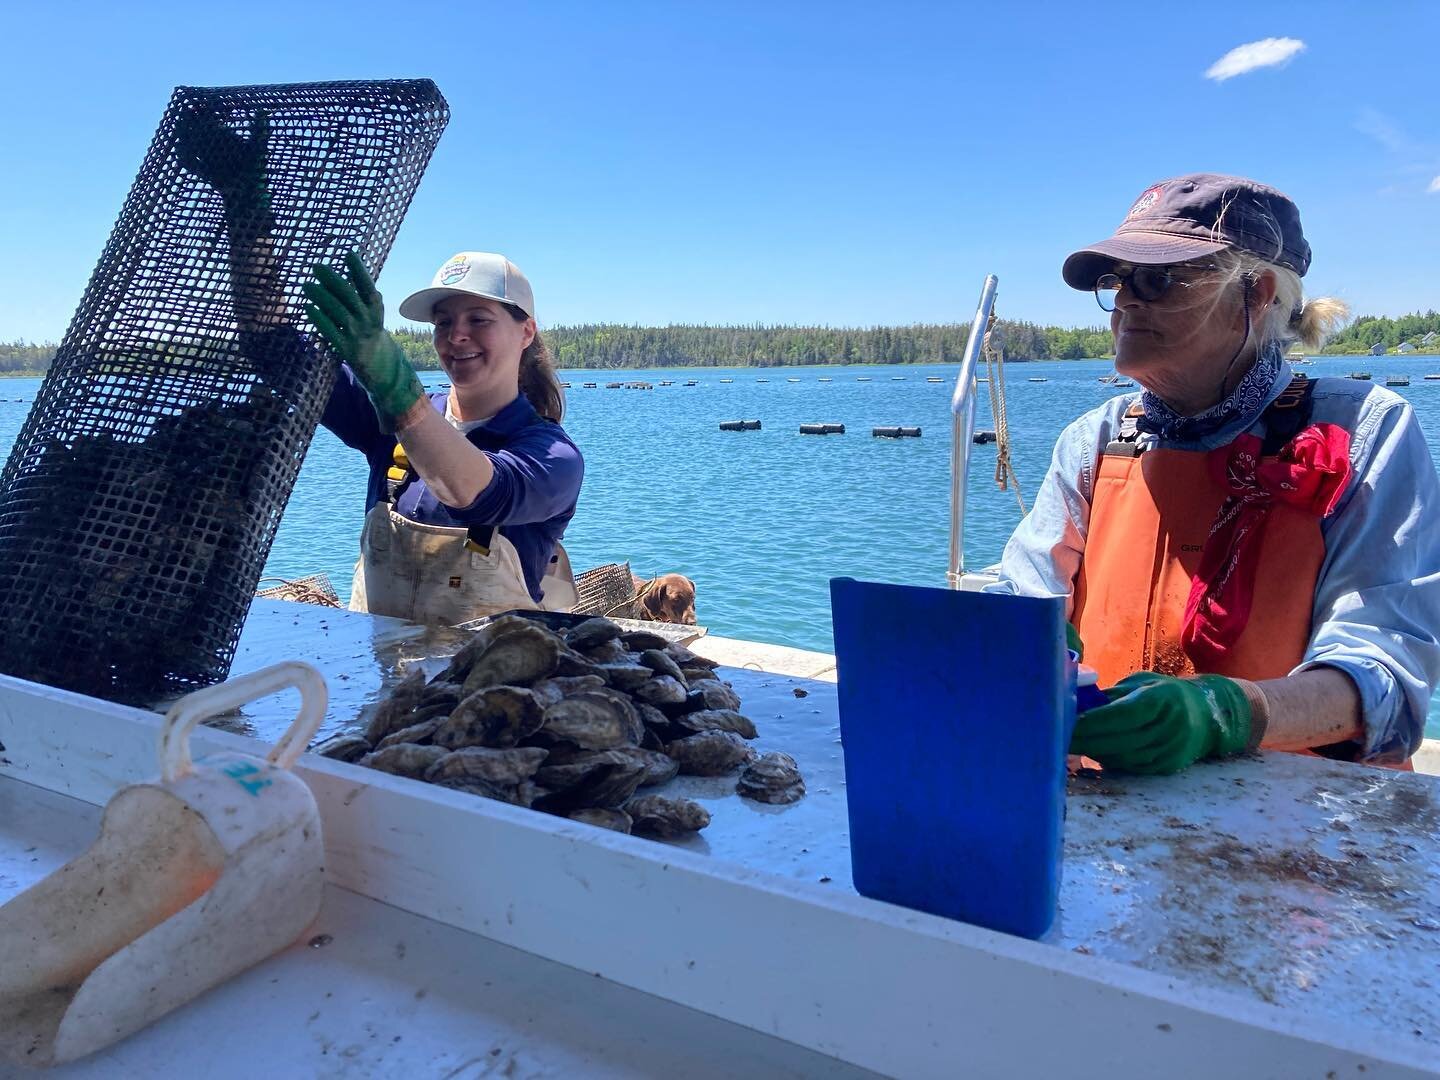 Oysters getting the best kind of care w this farm crew #cranberryoysters #maineoysters #cranberryisles #janegraymotherofoysters